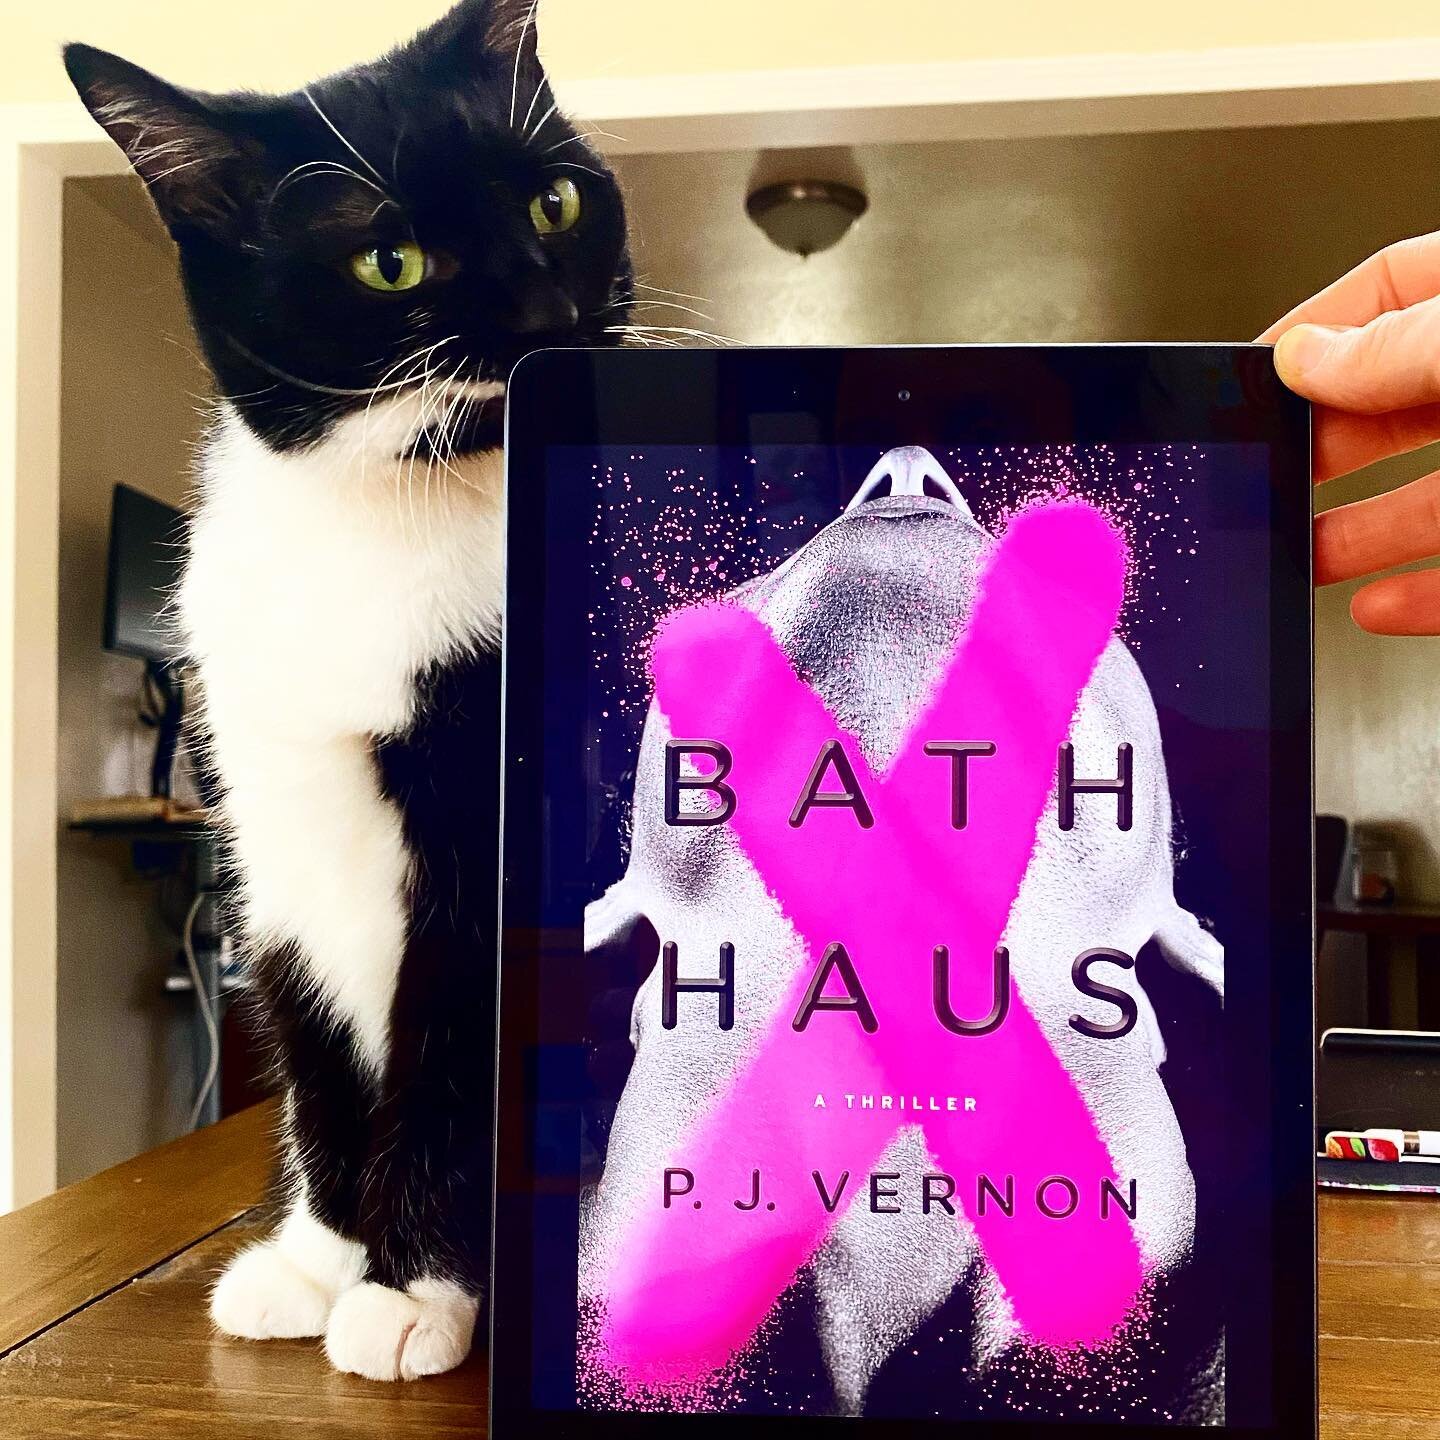 So, BATHHAUS by @pjvernonbooks is DEFINITELY making my Top 5 list this year 😱 an up all night read that left me contemplating how to write so damn well. First heard about it on @vanessalillie &lsquo;s IG live event, and heard another excellent inter